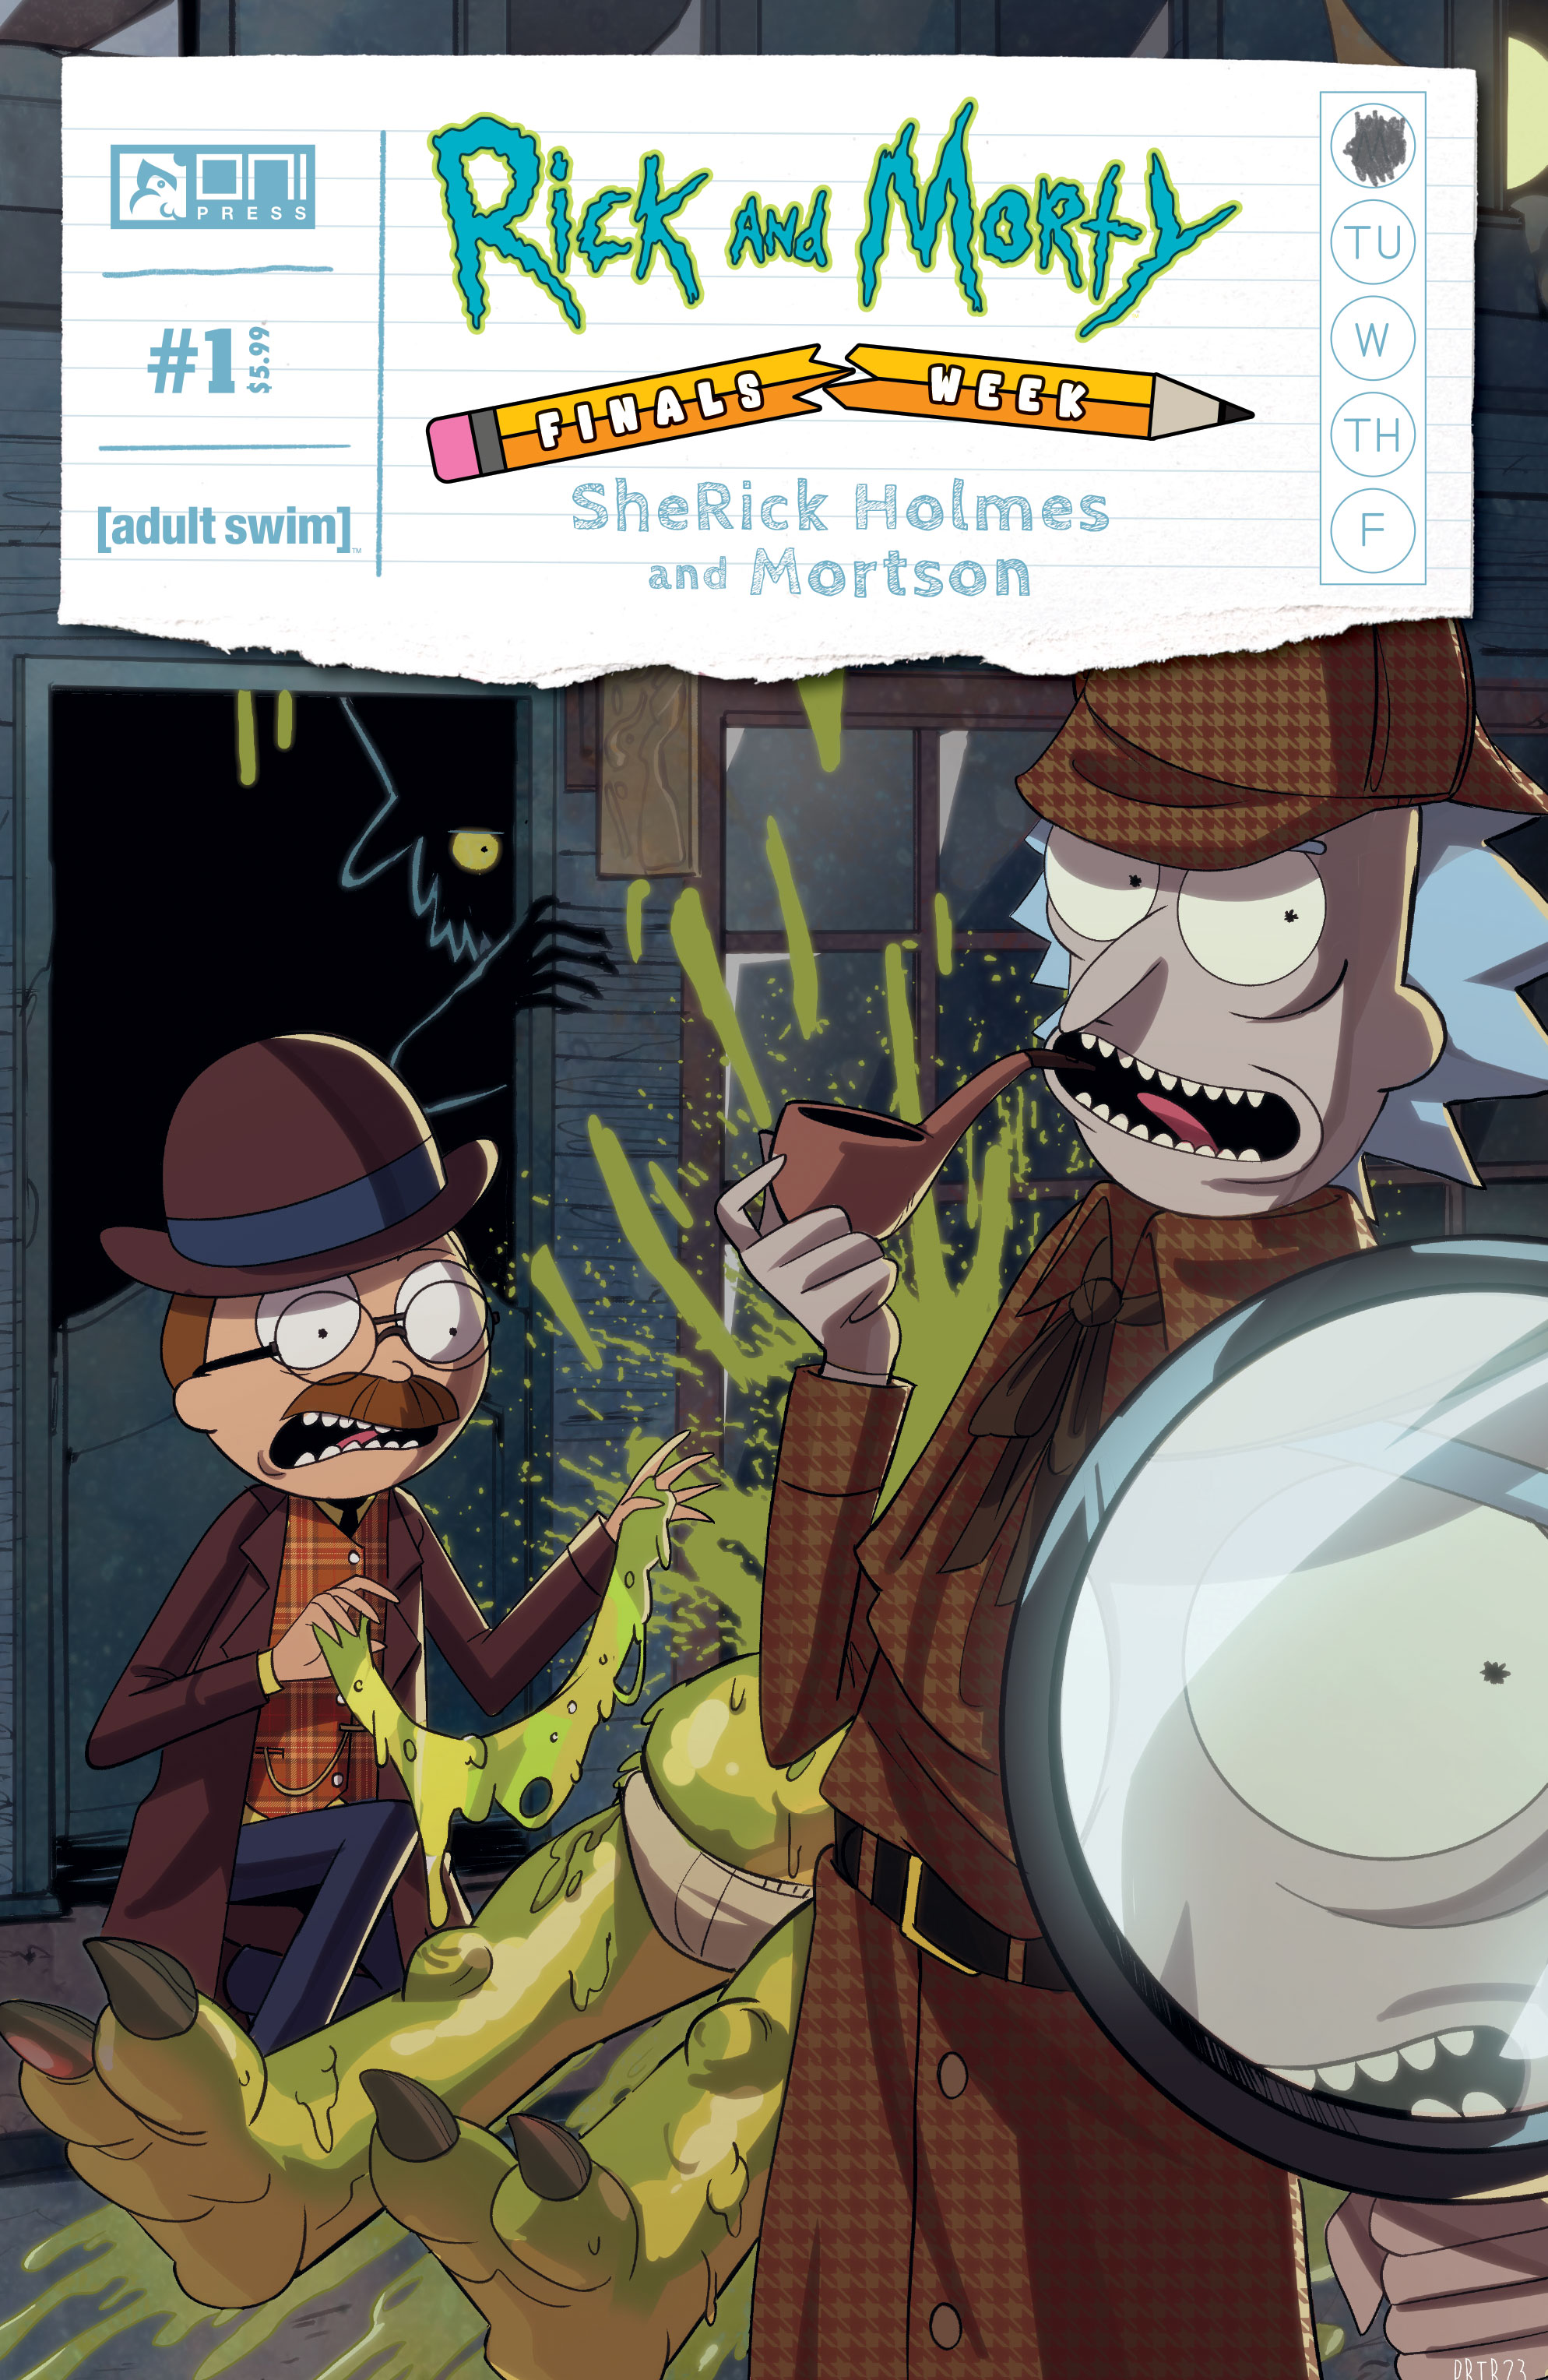 Rick and Morty Presents Finals Week Sherick Holmes and Mortson #1 Cover A Priscilla Tramontan (Of 5)